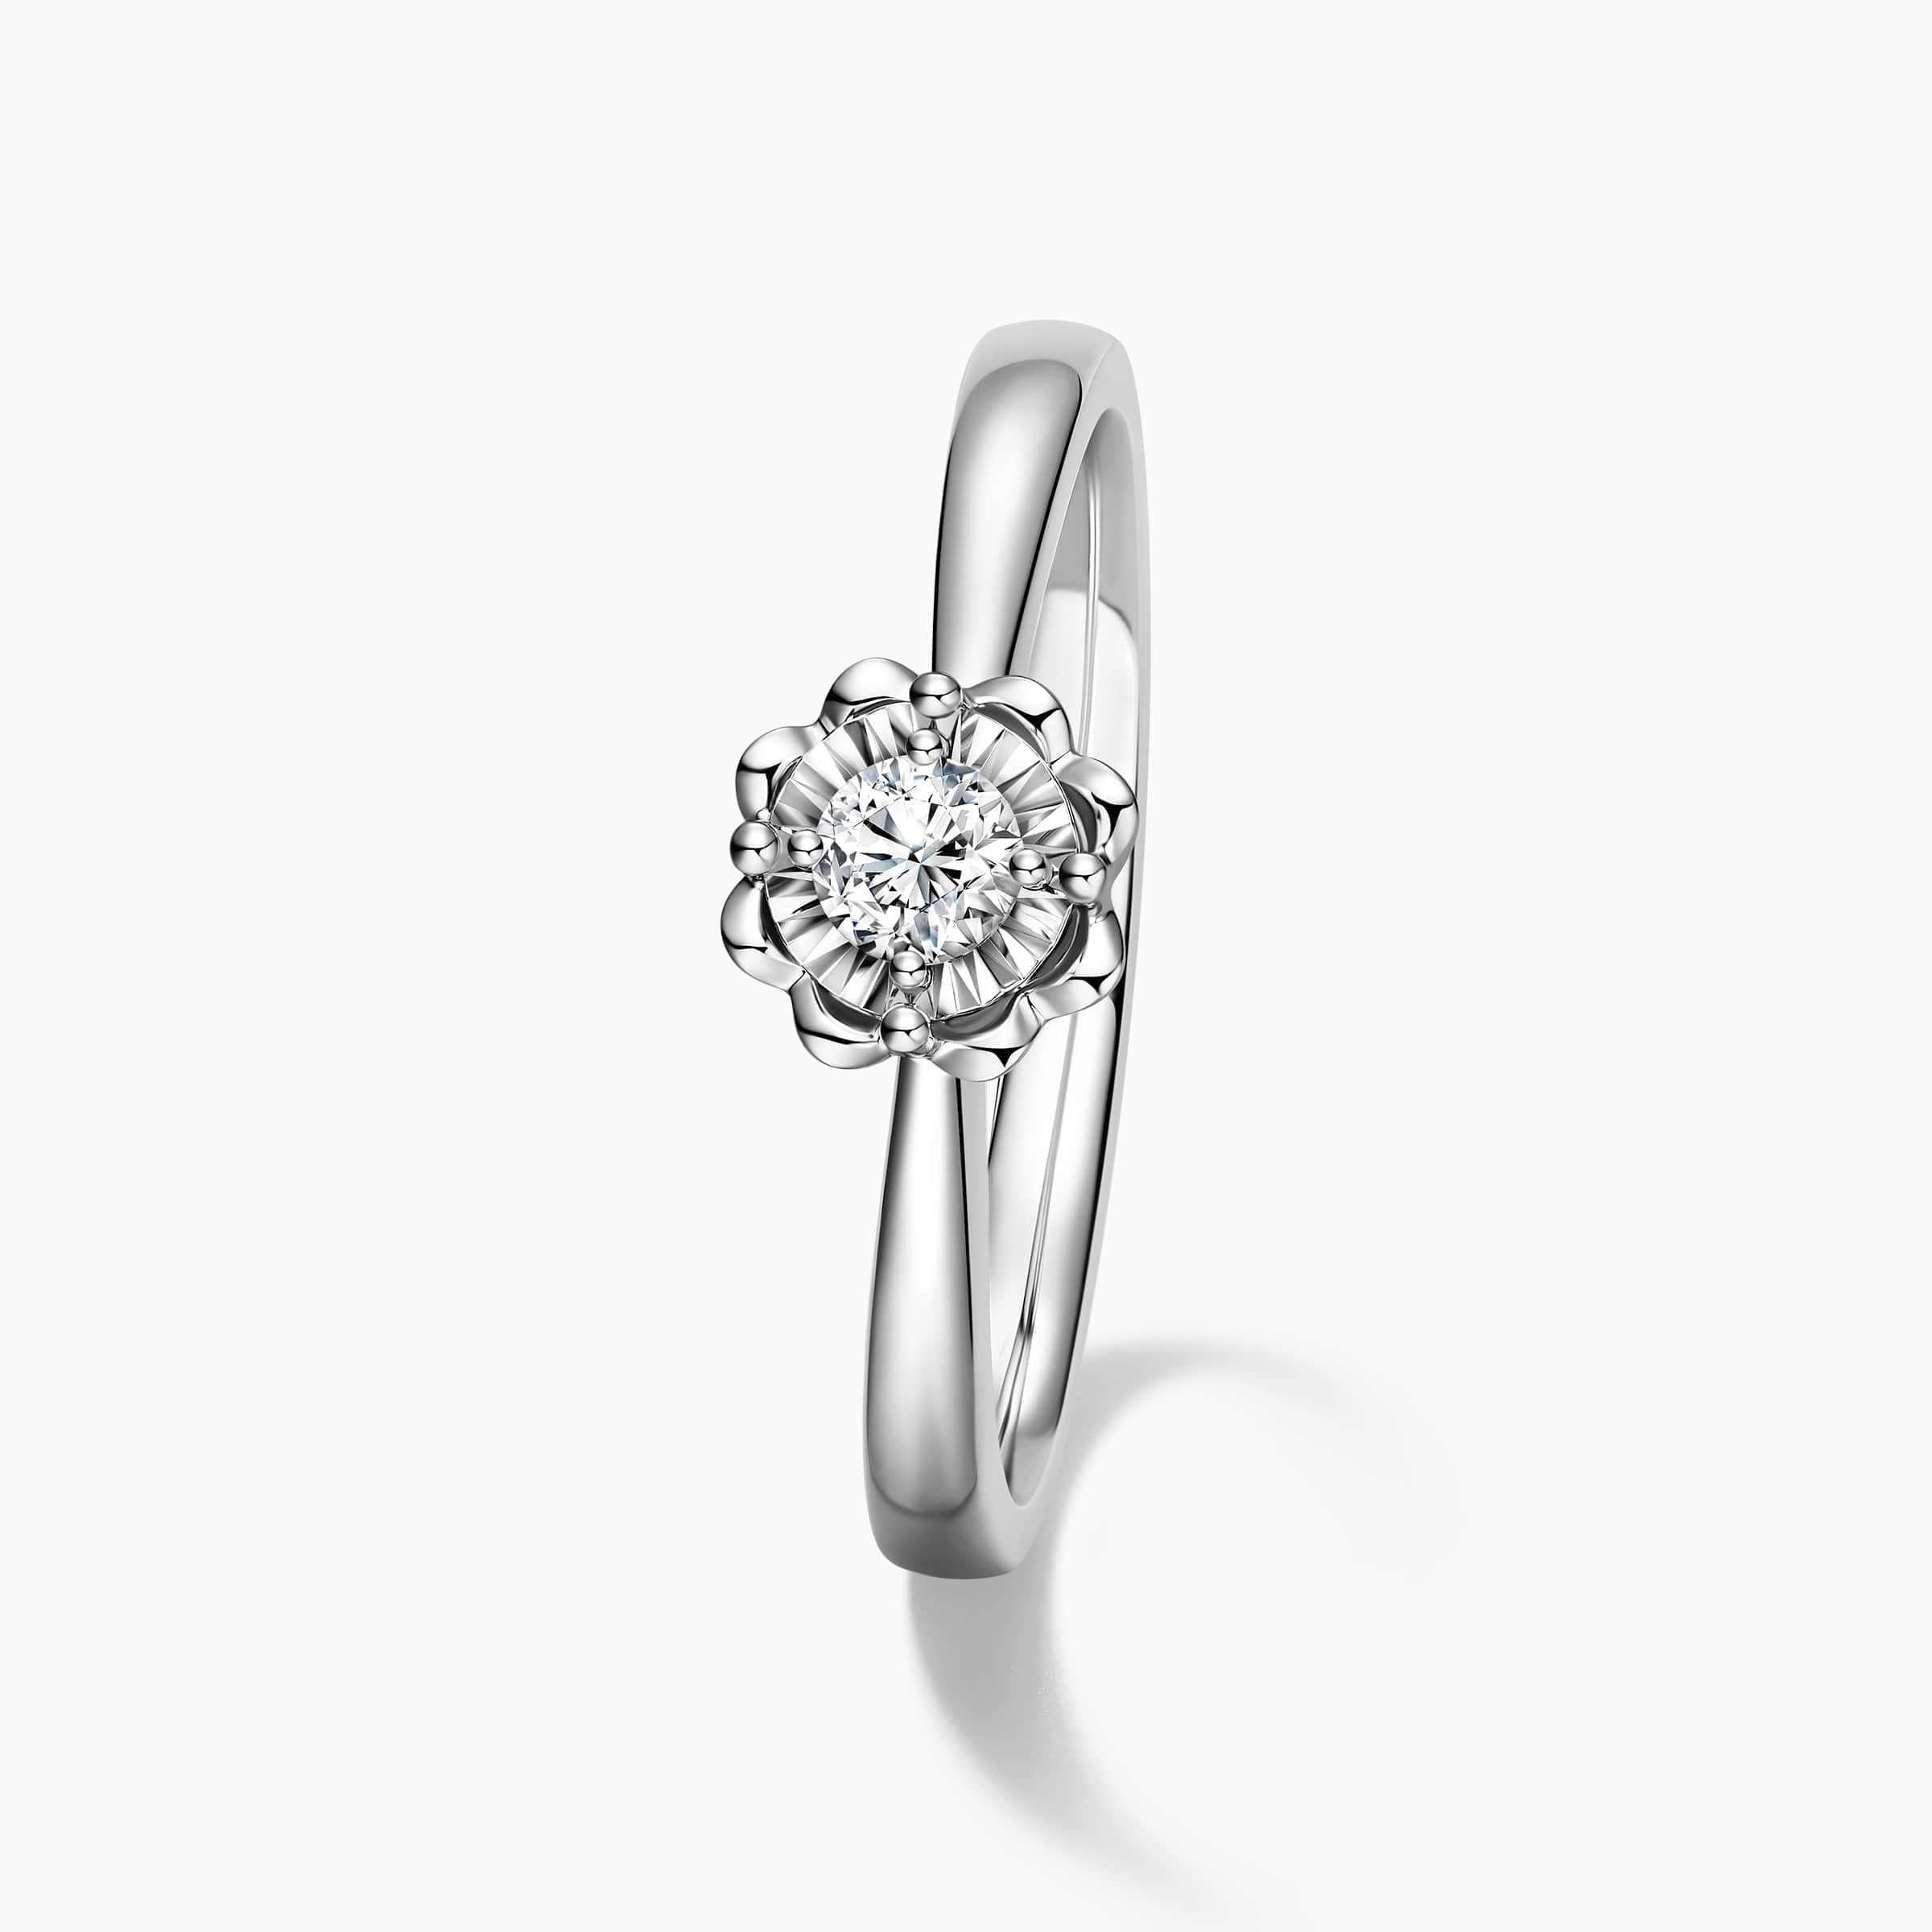 Darry Ring floral promise ring top view